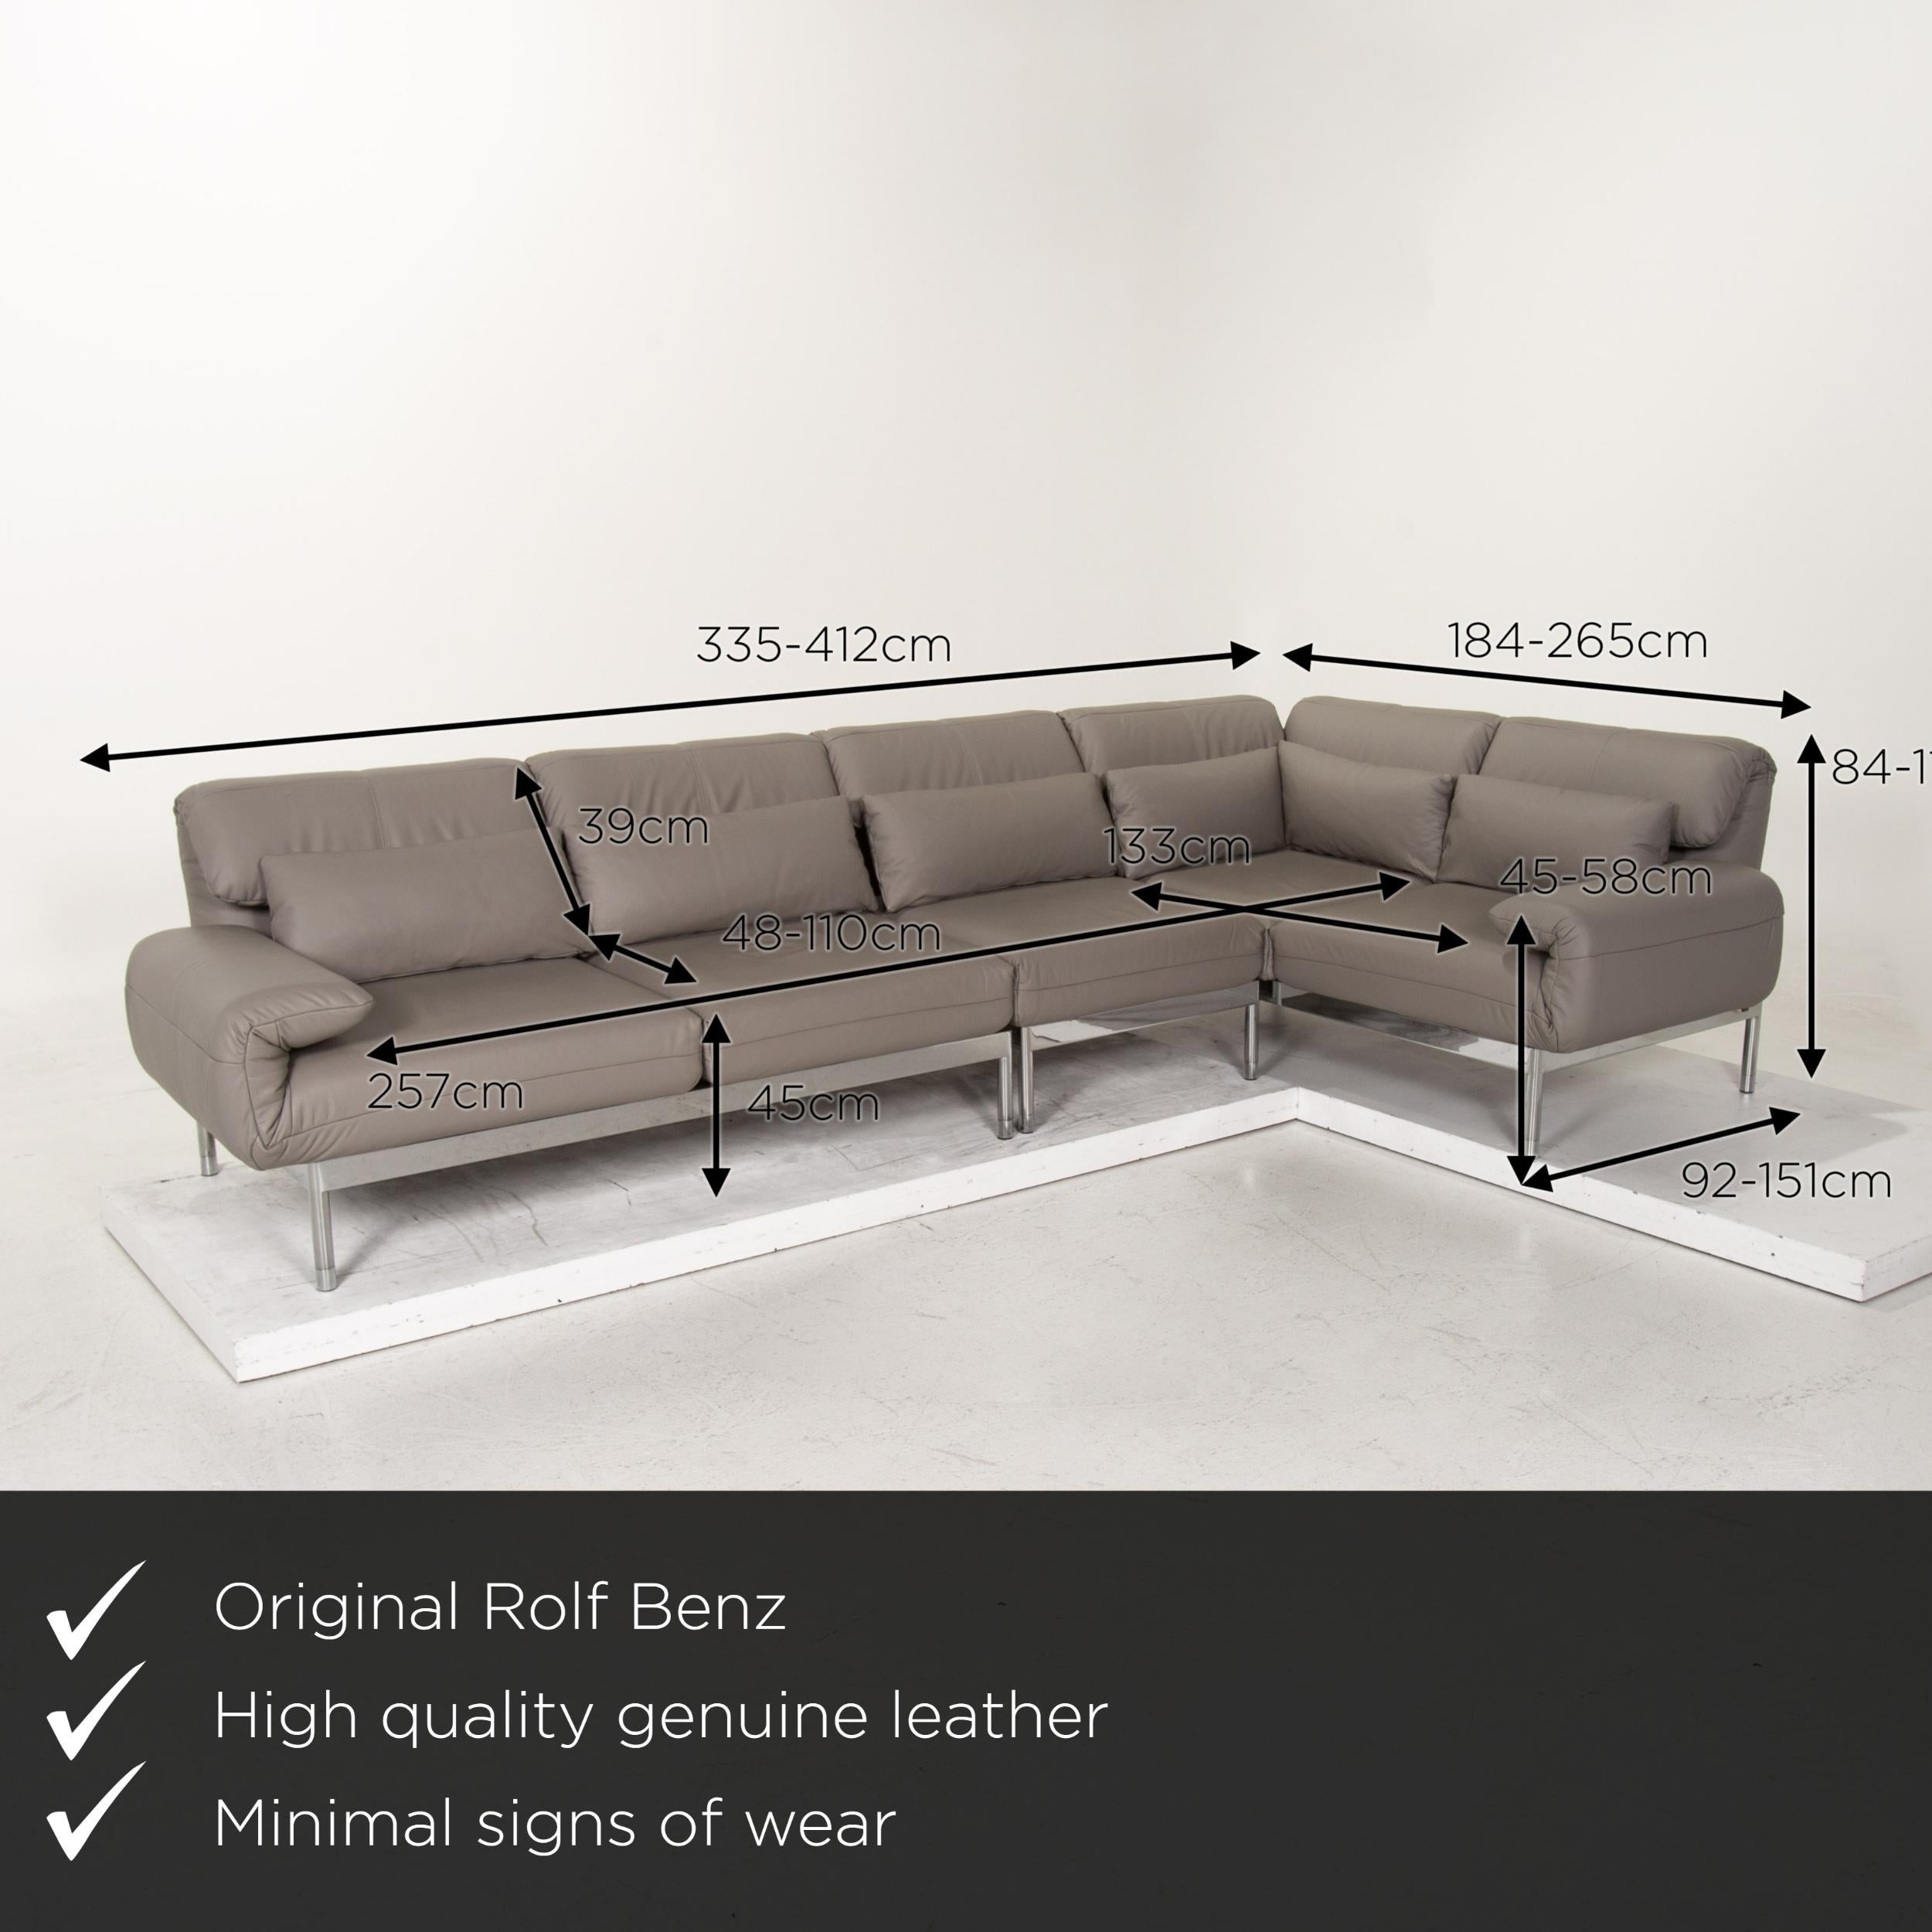 We present to you a Rolf Benz Plura leather corner sofa gray sofa function relax function couch.


 Product measurements in centimeters:
 

Depth 151
Width 335
Height 84
Seat height 45
Rest height 45
Seat depth 48
Seat width 257
Back